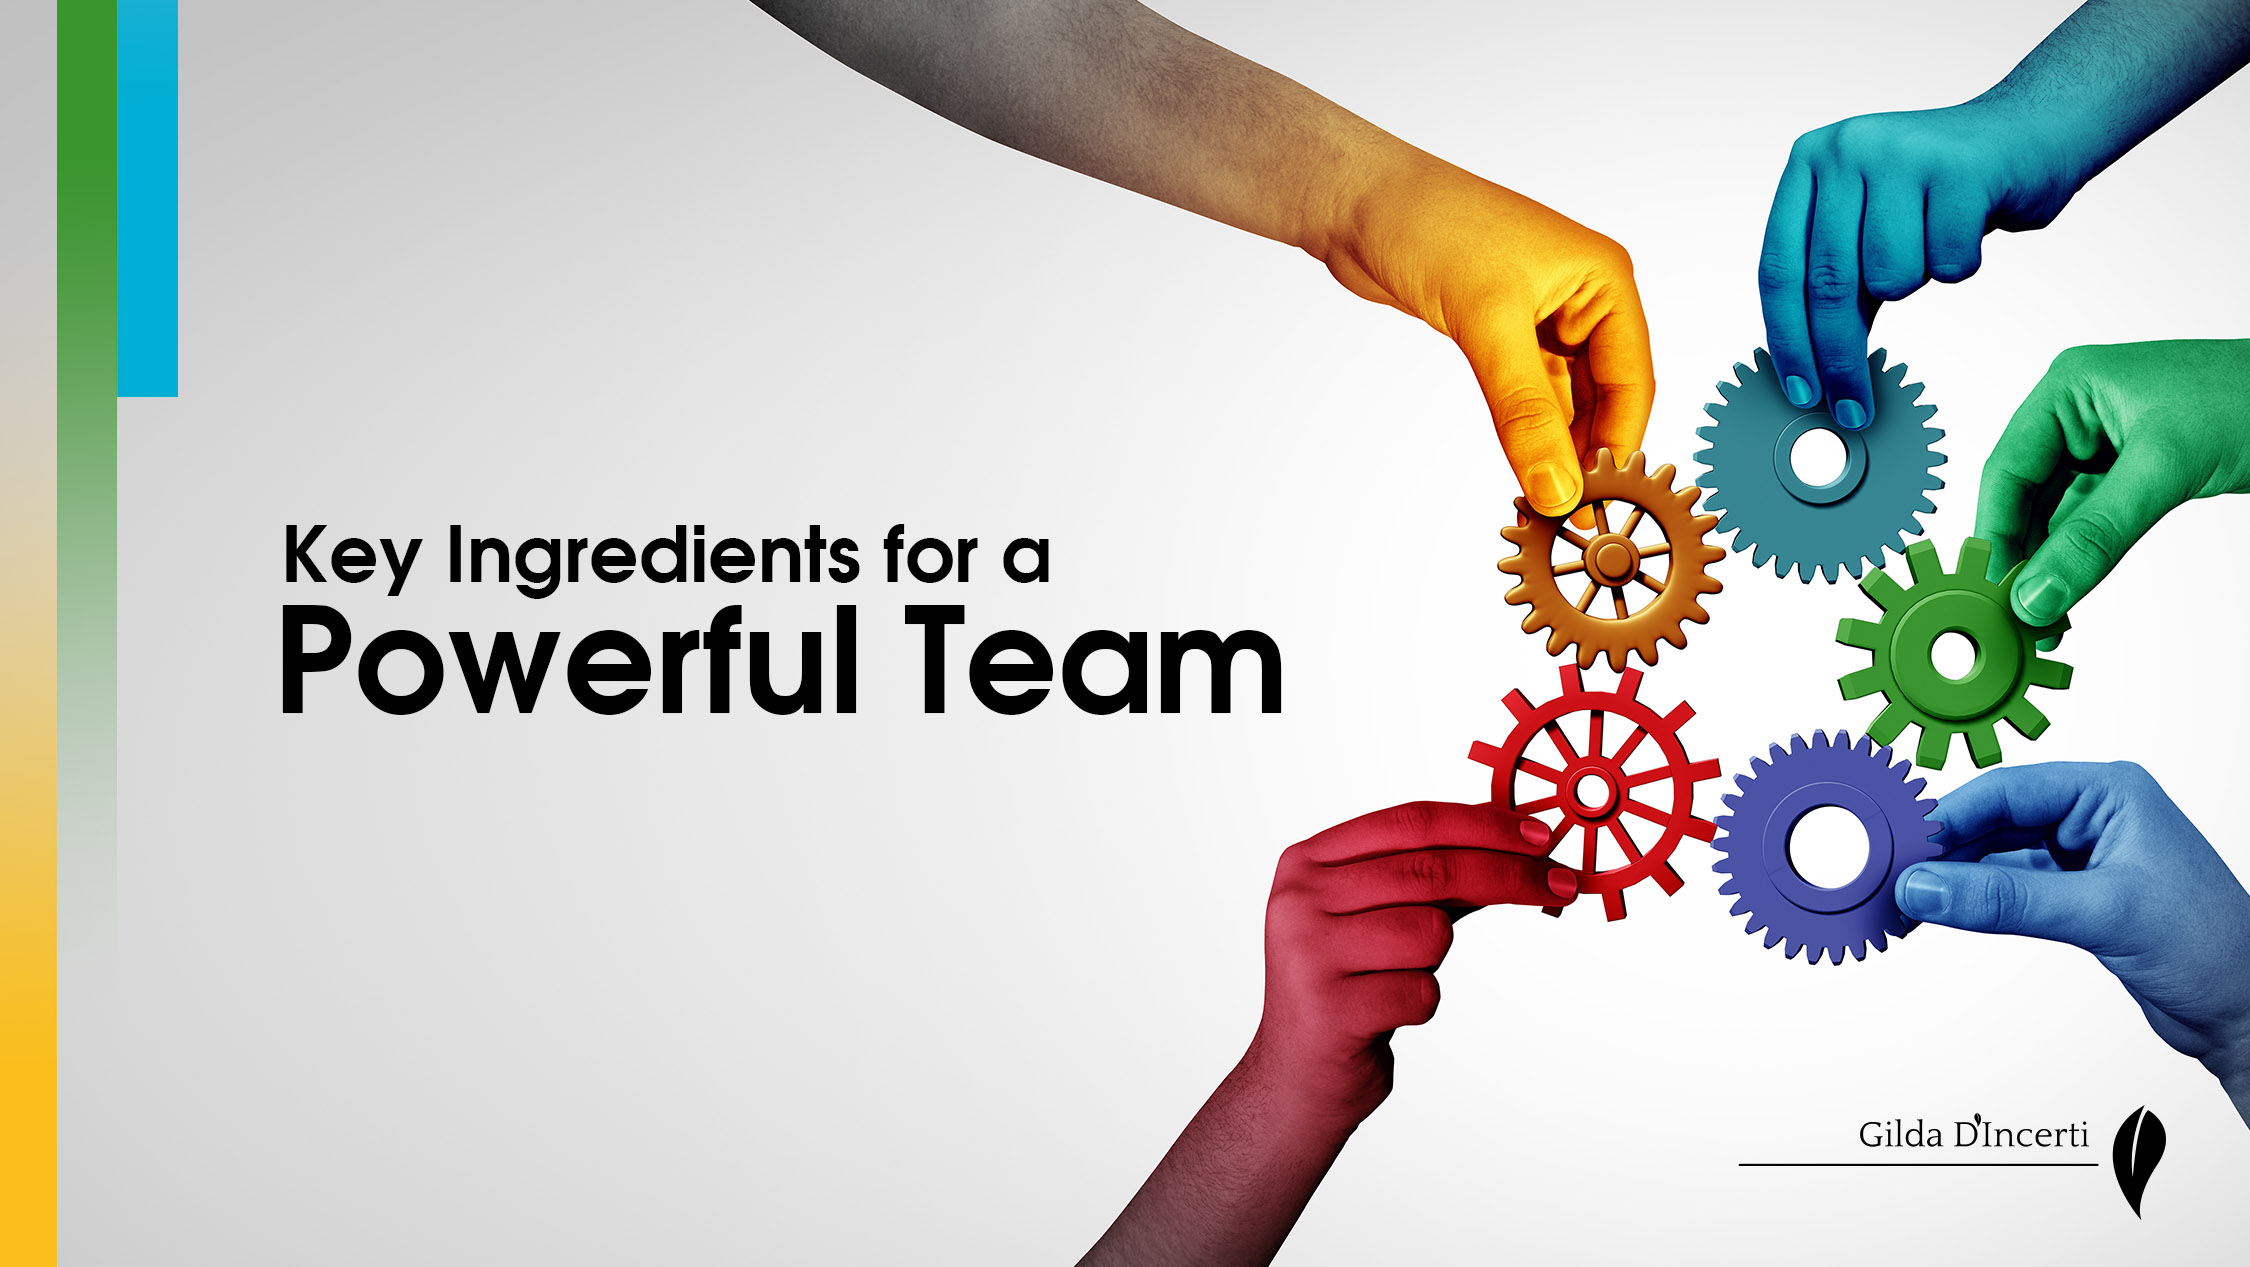 Key Ingredients for a Powerful Team